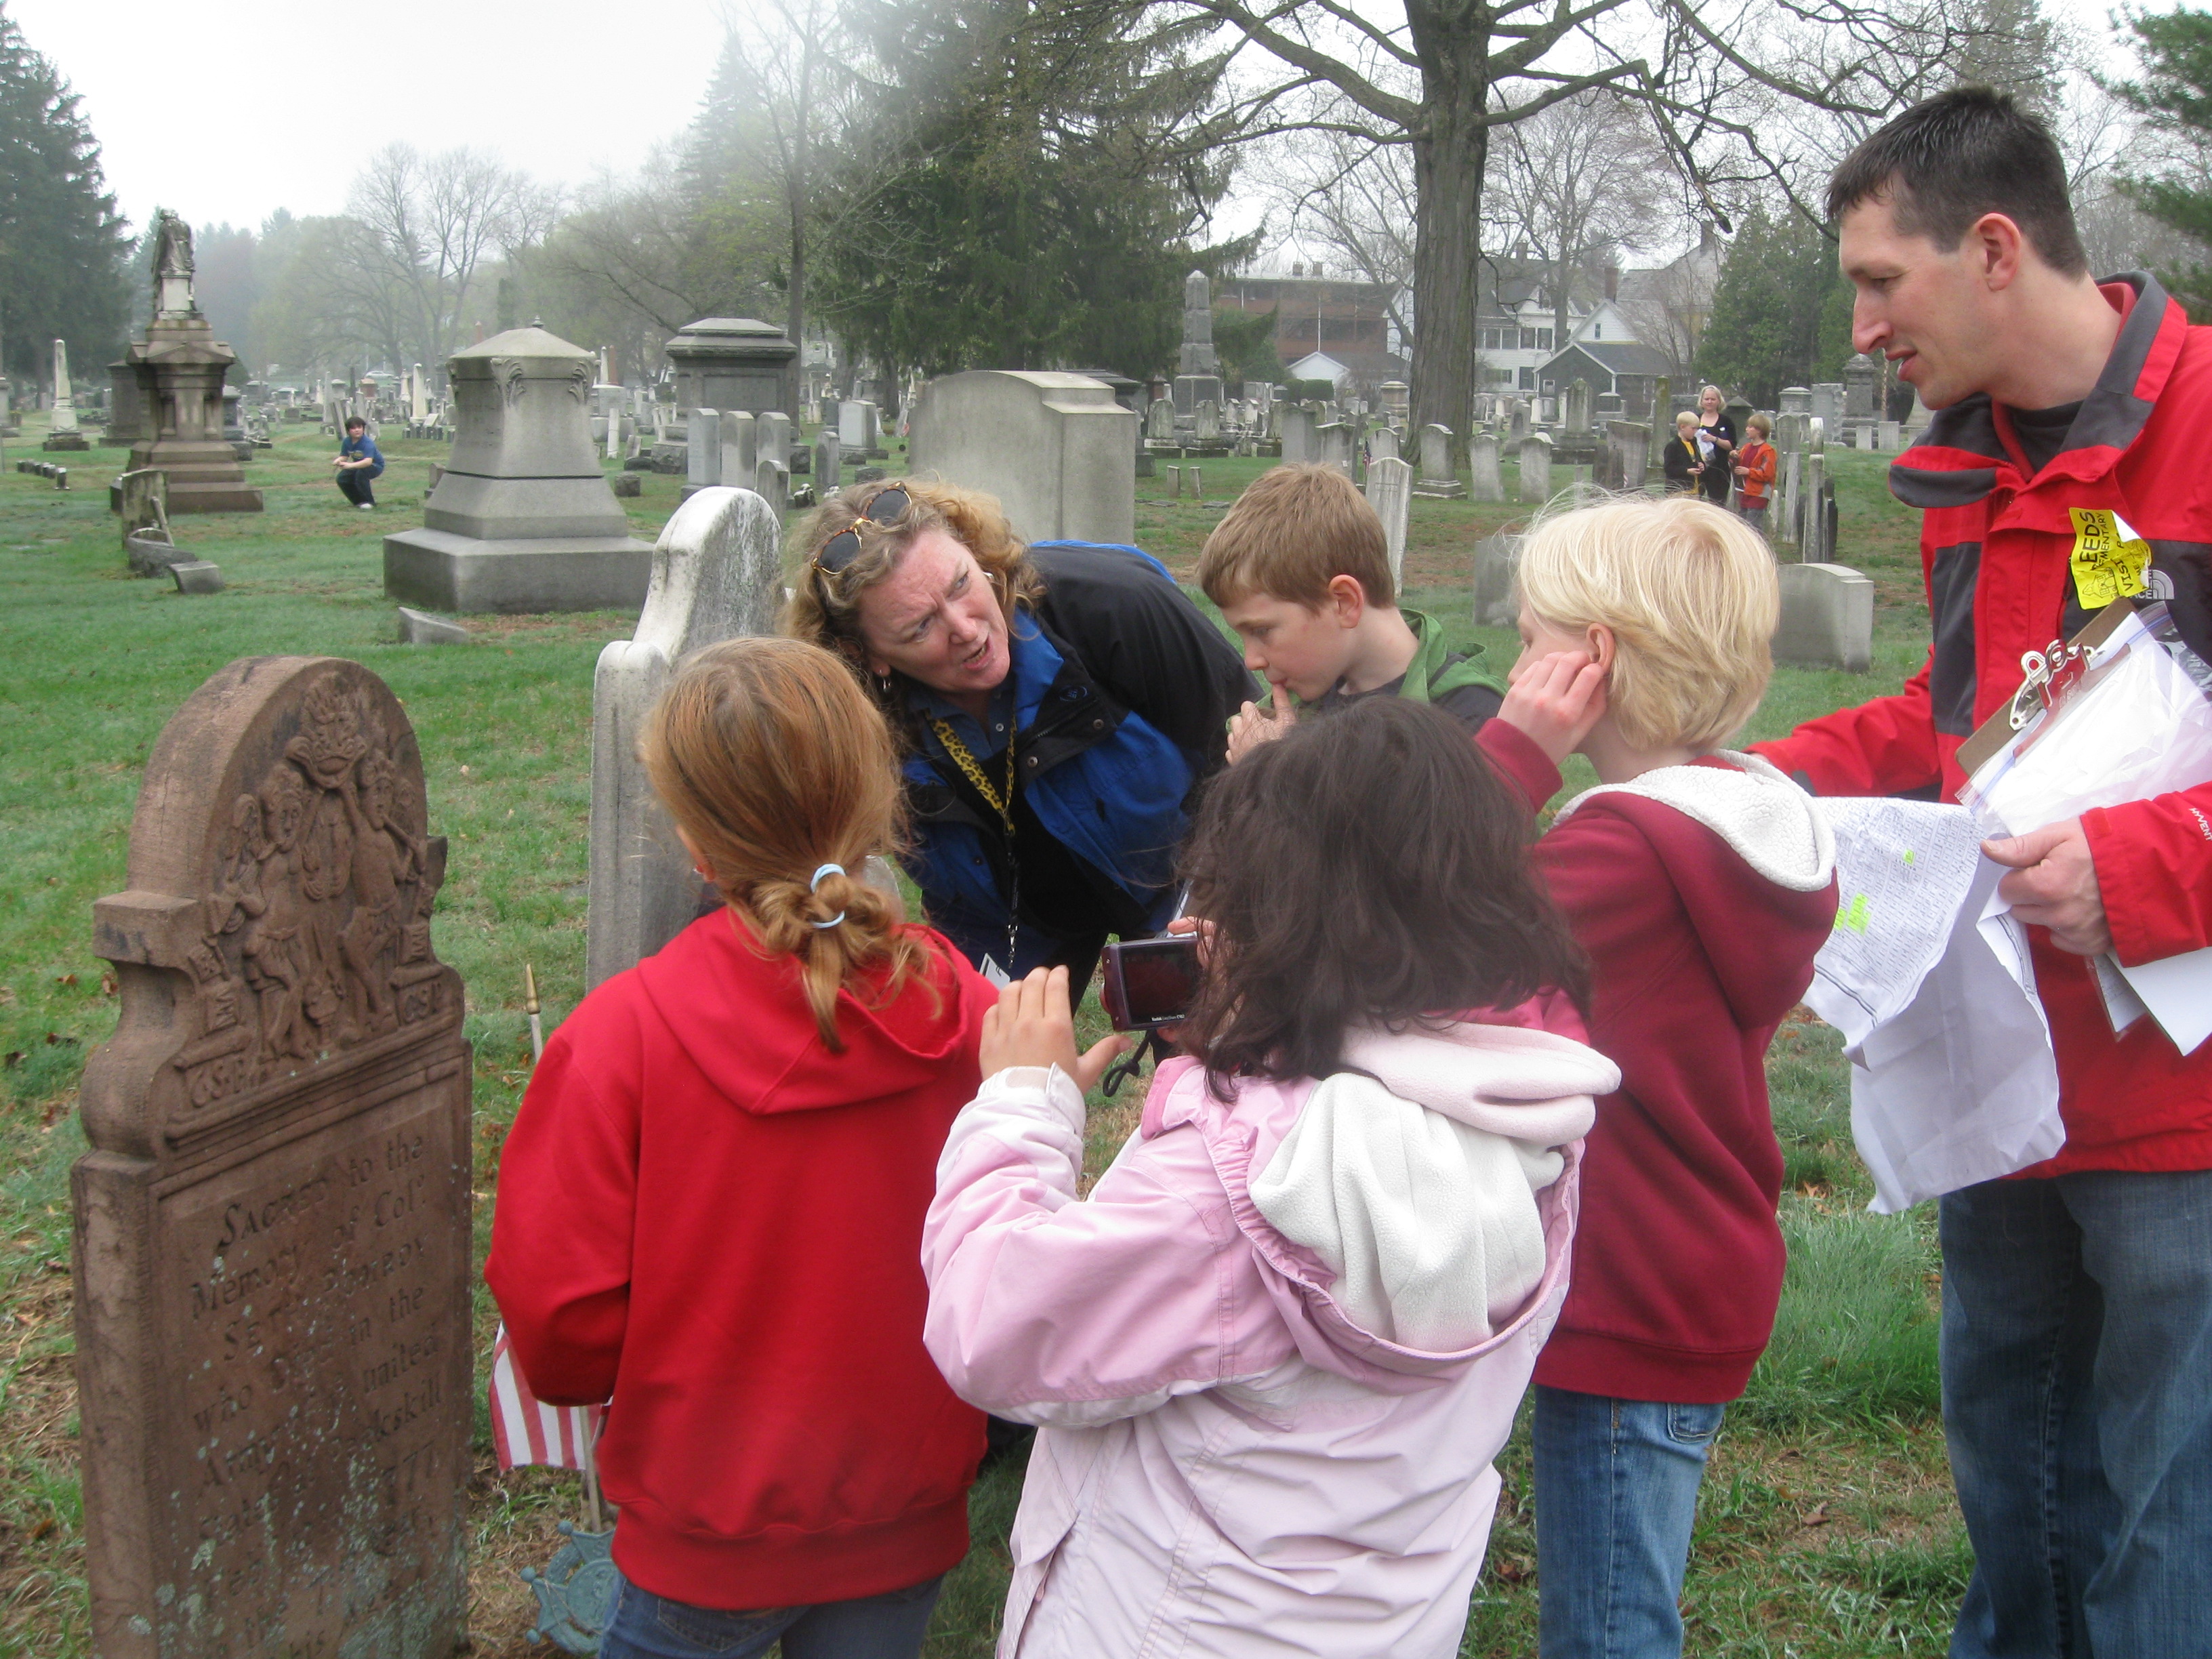 Header Photo - Denise Wood, Leeds Elementary School, Northampton, leads students in a study trip to the Bridge Street Cemetery in search of stories of Revolutionary War soldiers.